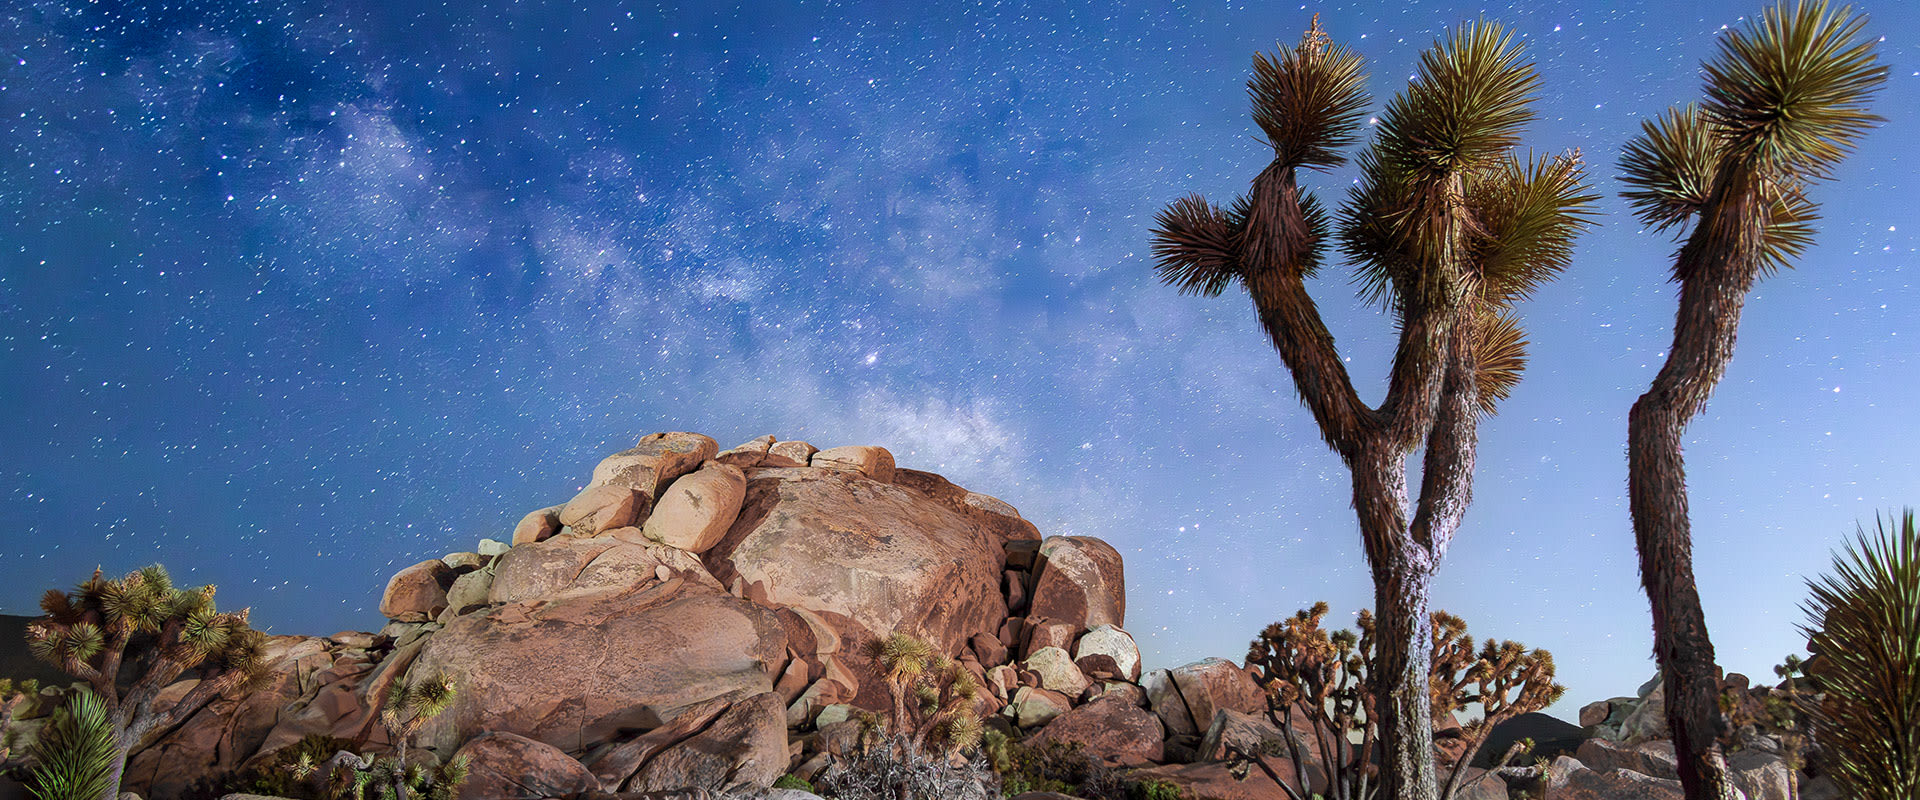 Photo of a stunning night sky filled with twinkling stars over the iconic Joshua Tree National Park landscape in California.